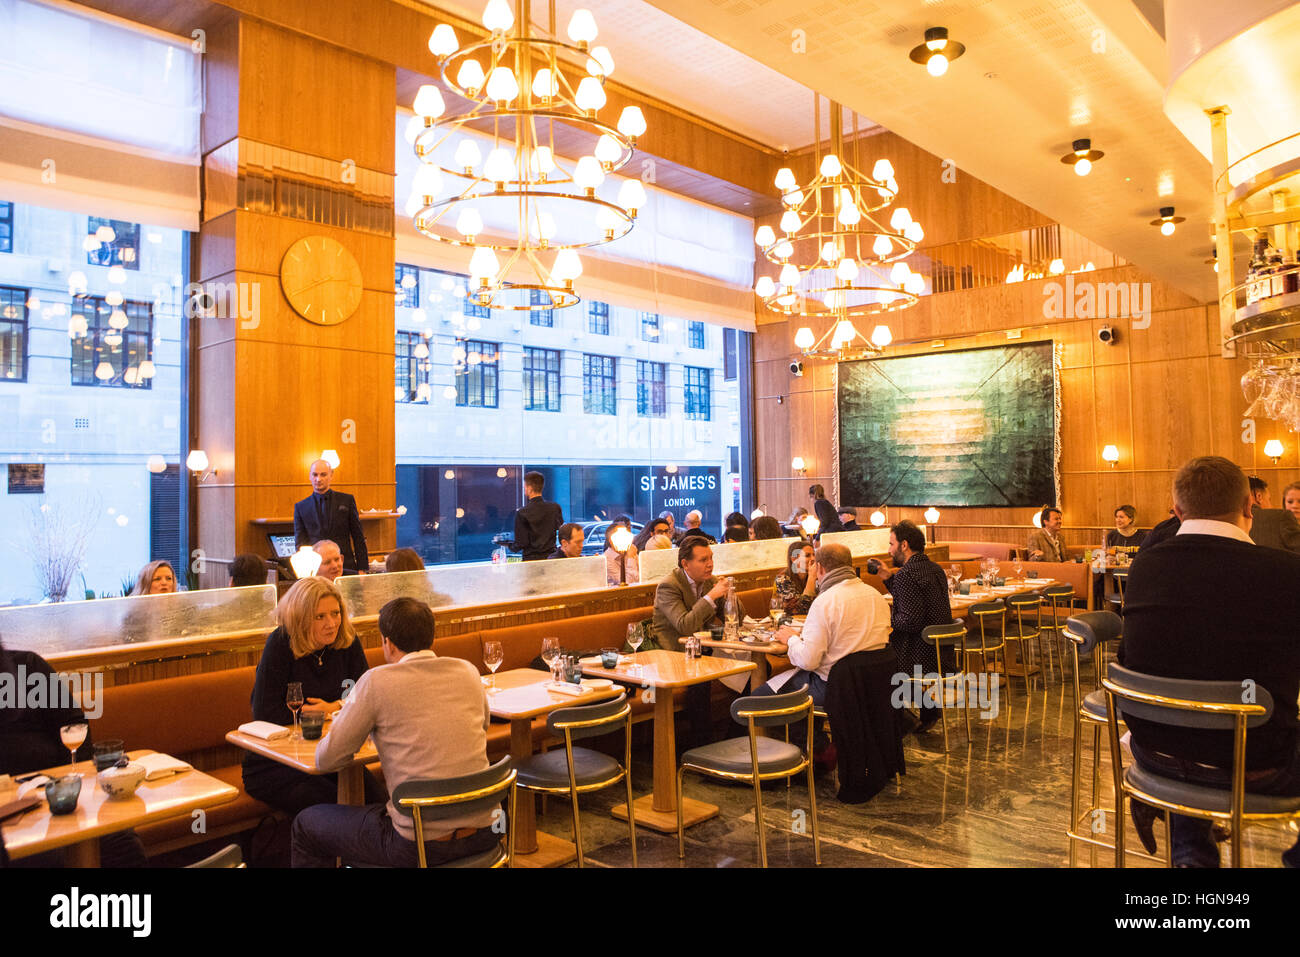 The interior of the restaurant Aquavit in central London. One of the many fine restaurants that are in the city of London. Stock Photo